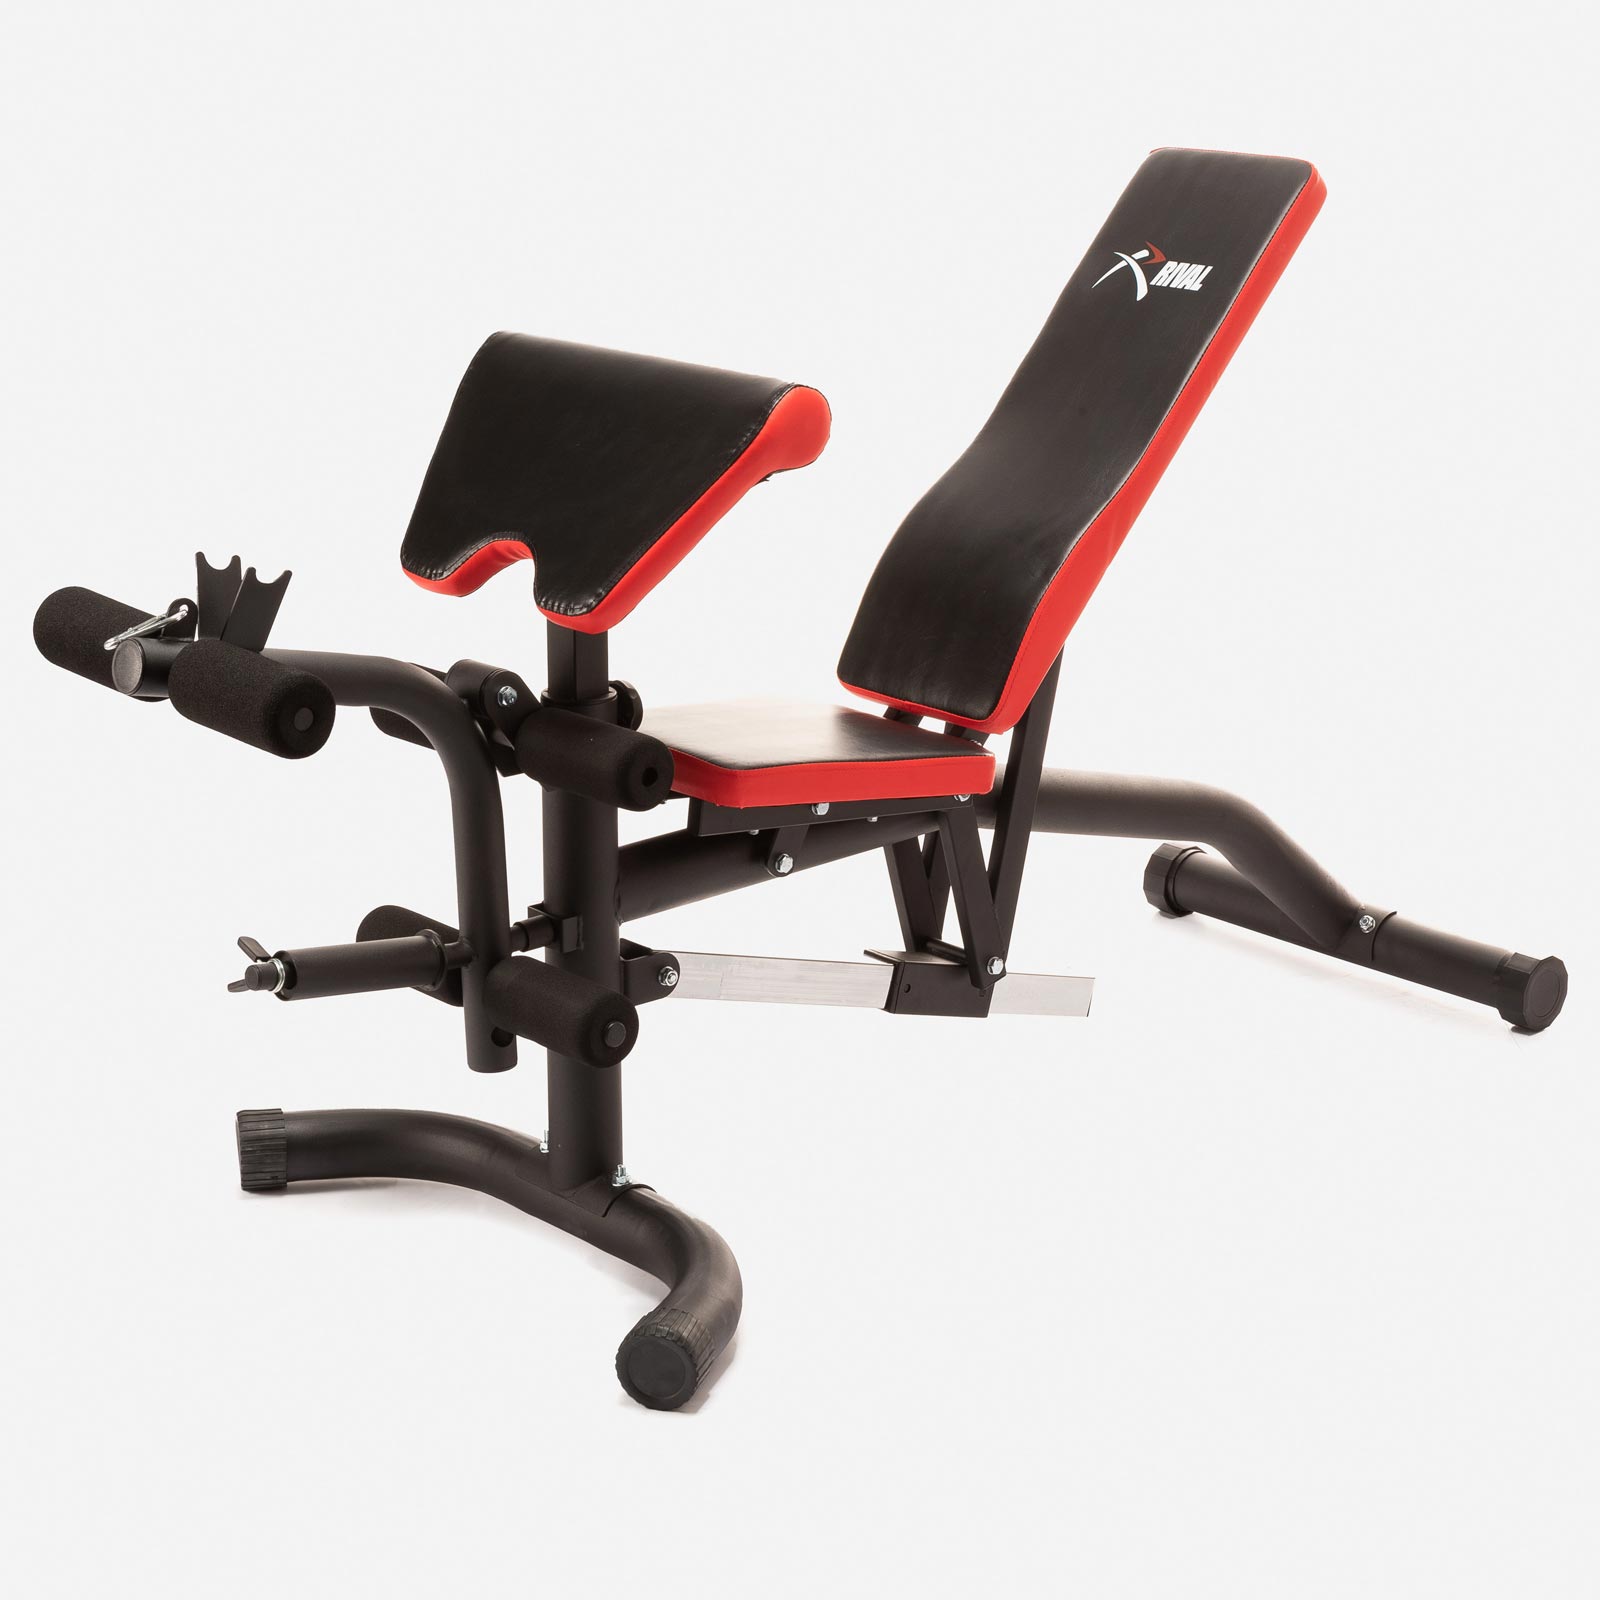 RIVAL DELUXE OLYMPIC B6 WEIGHT BENCH